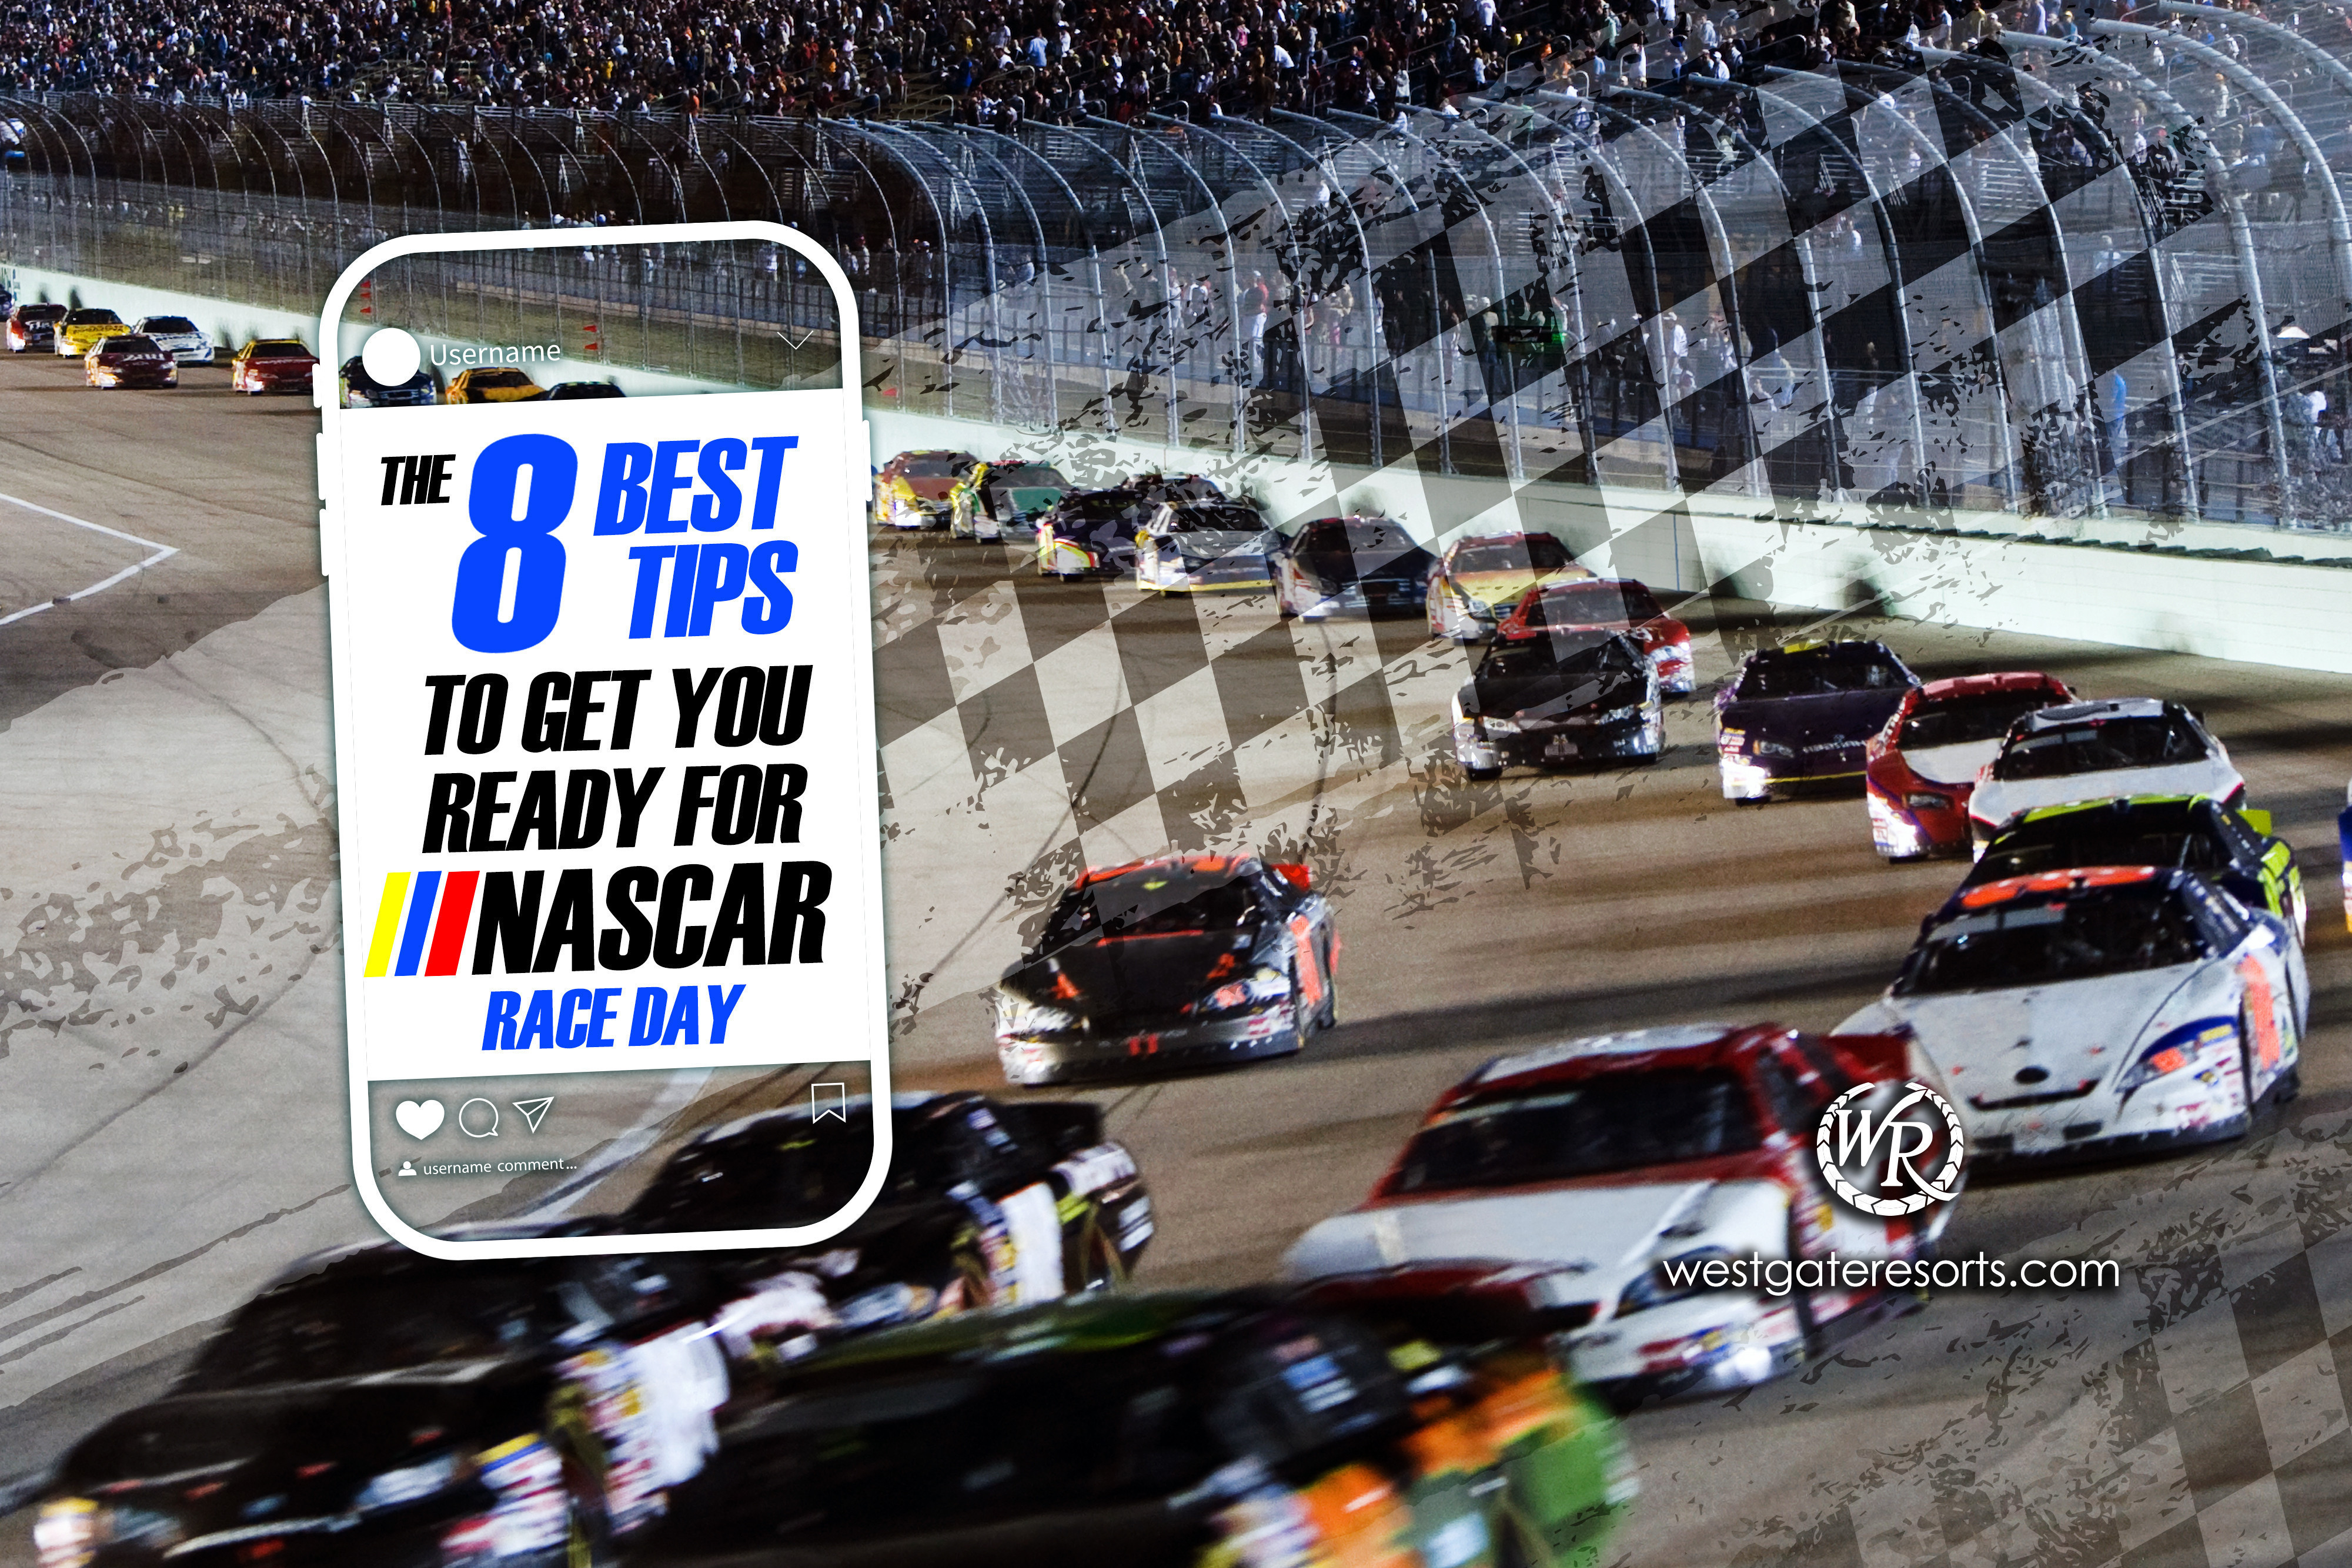 The 8 Best Tips to get Ready for Nascar Race Day